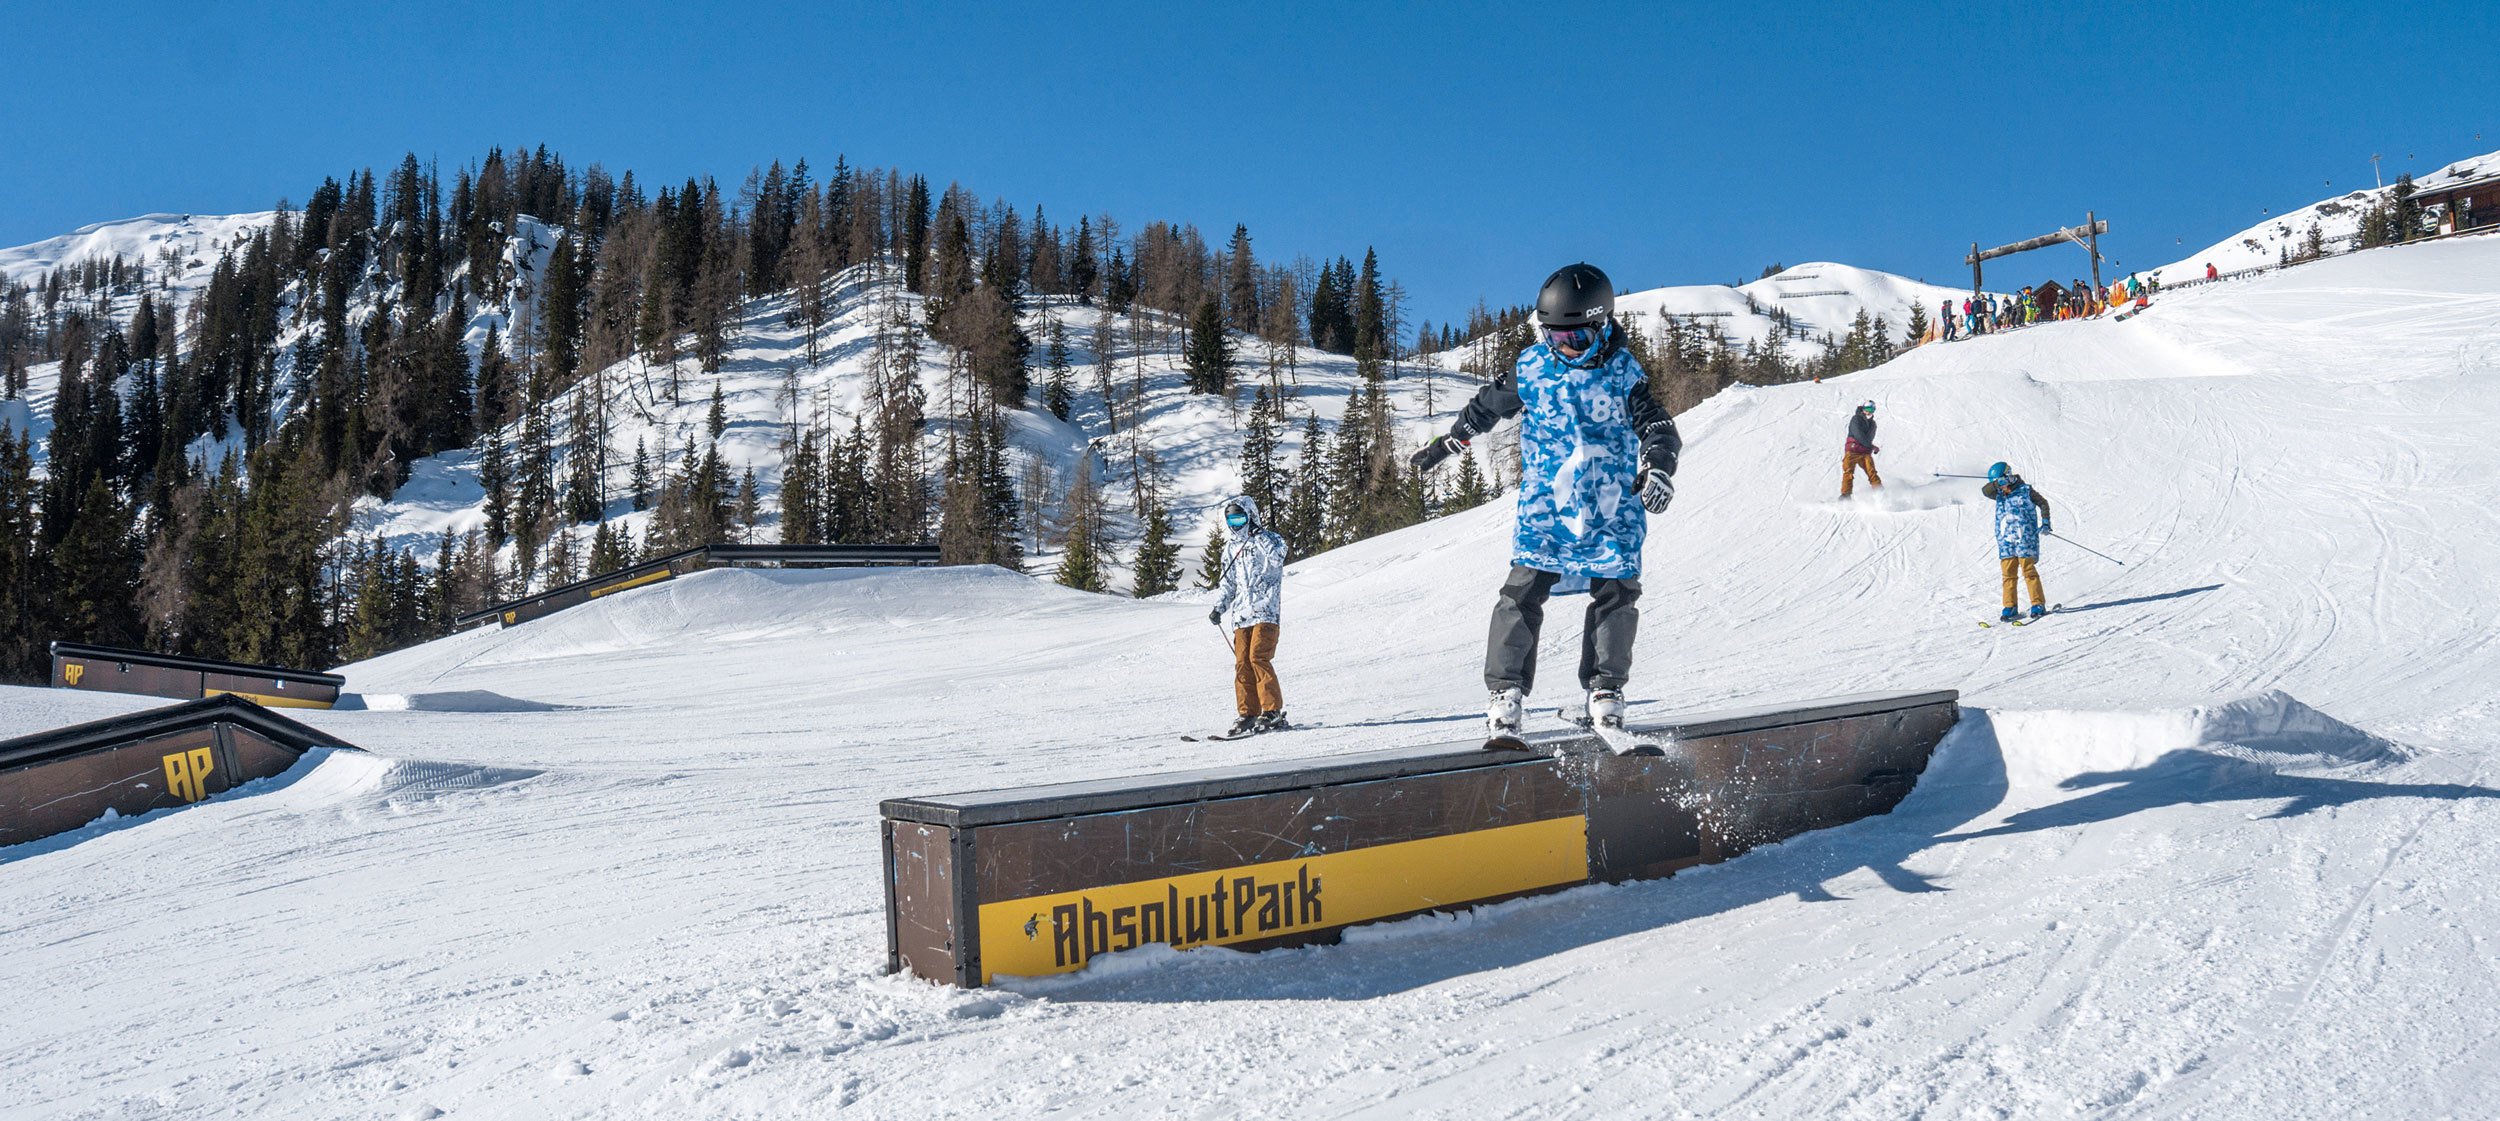 A young freeskier doing a trick on a rail at Absolut Park. 